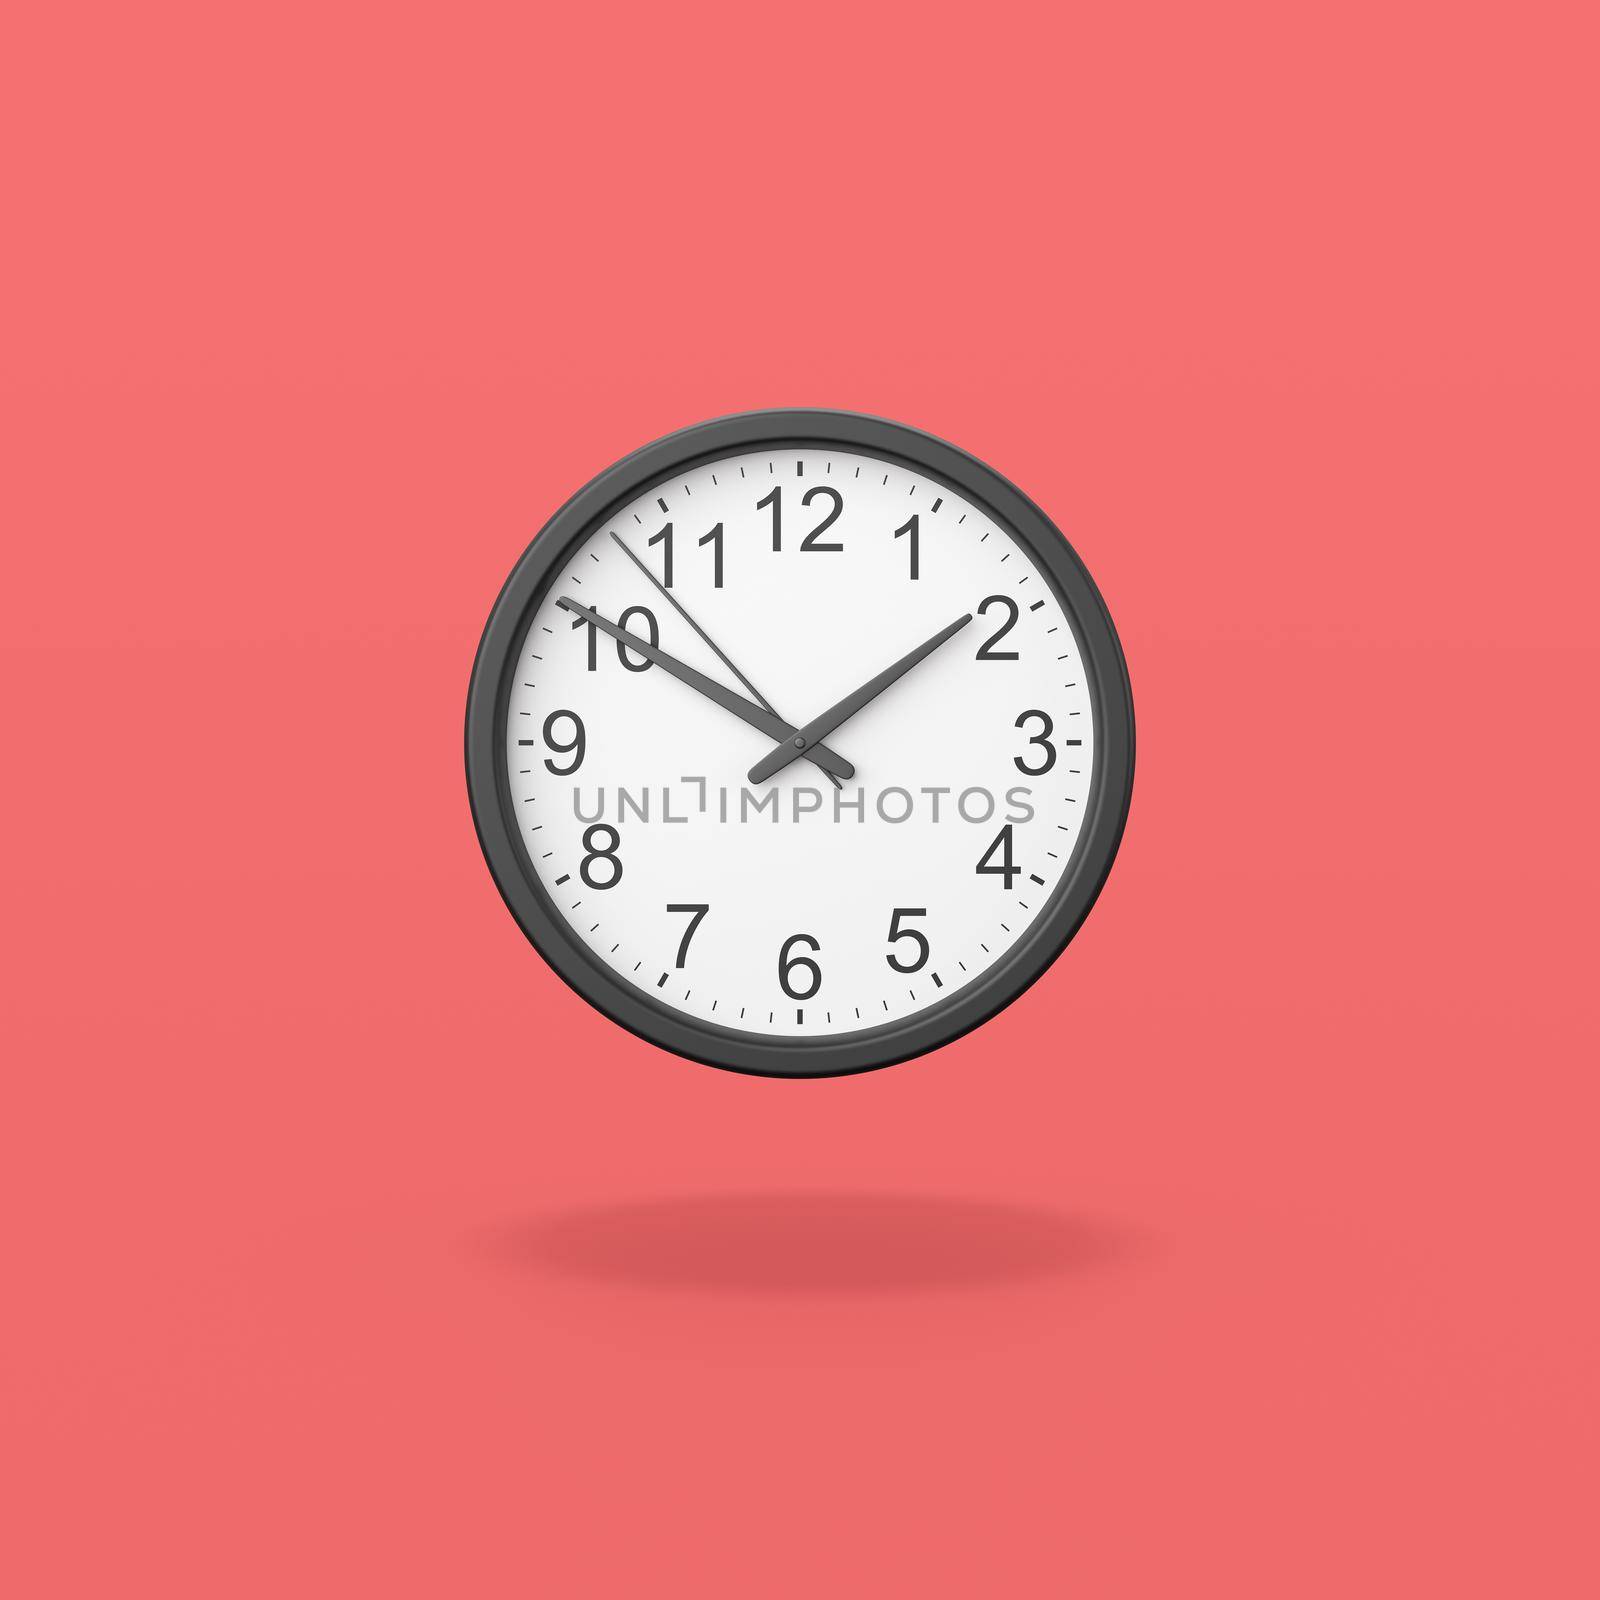 Black Analog Clock on Red Background by make